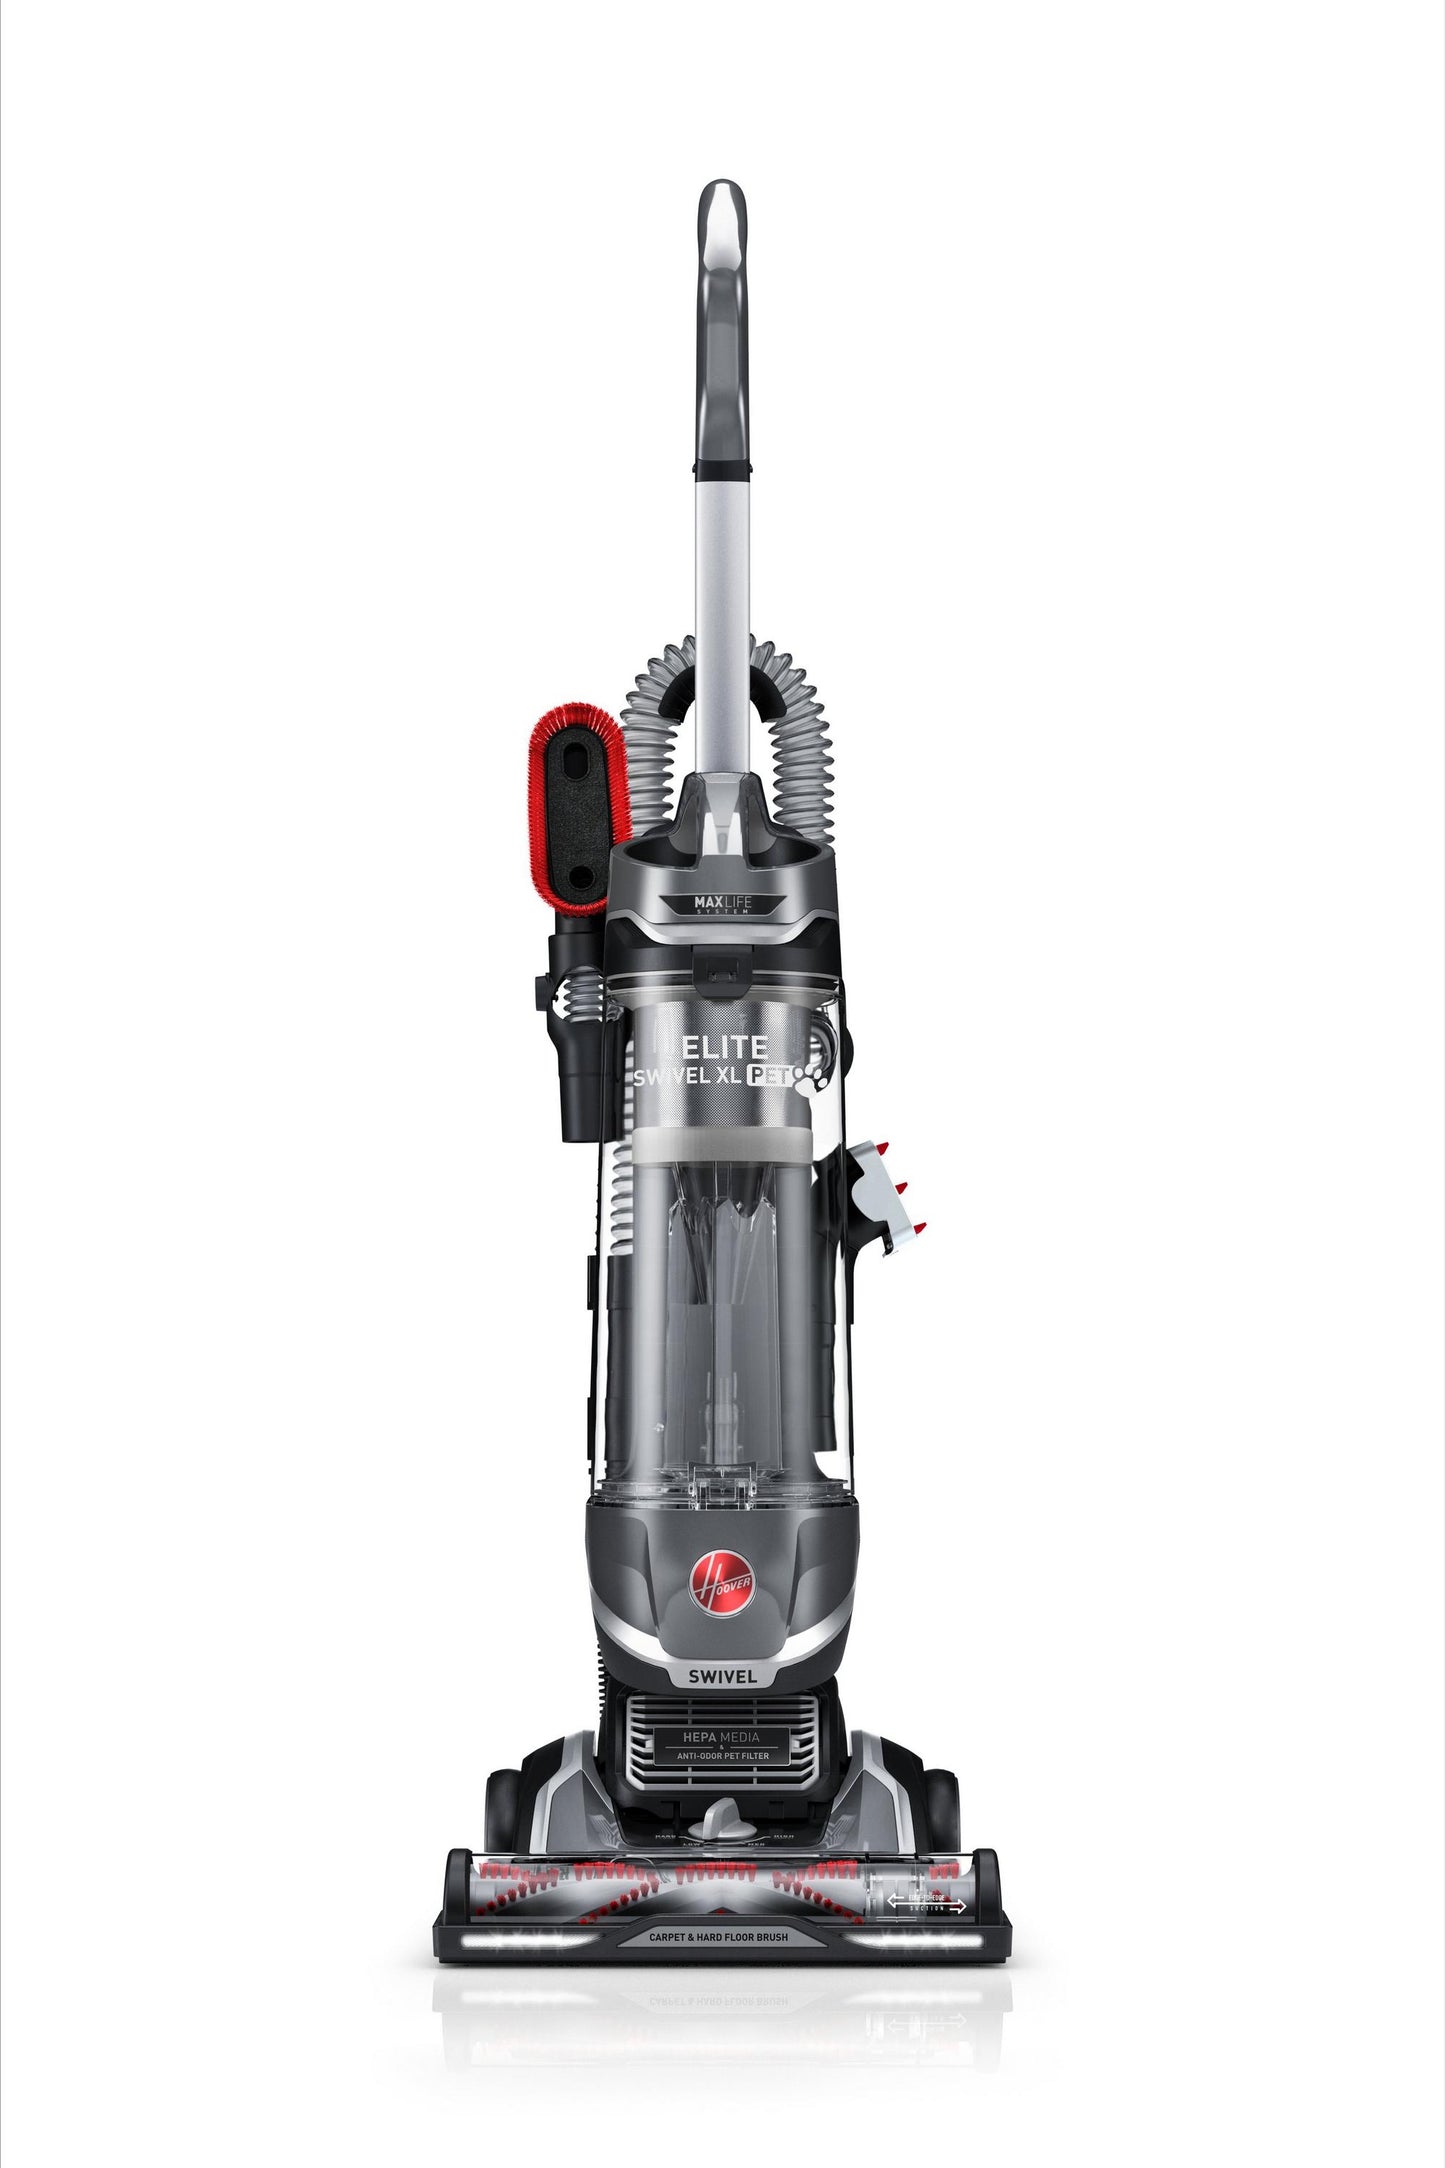 I need a new filter, but I don't know the brand name of the vacuum :  r/VacuumCleaners